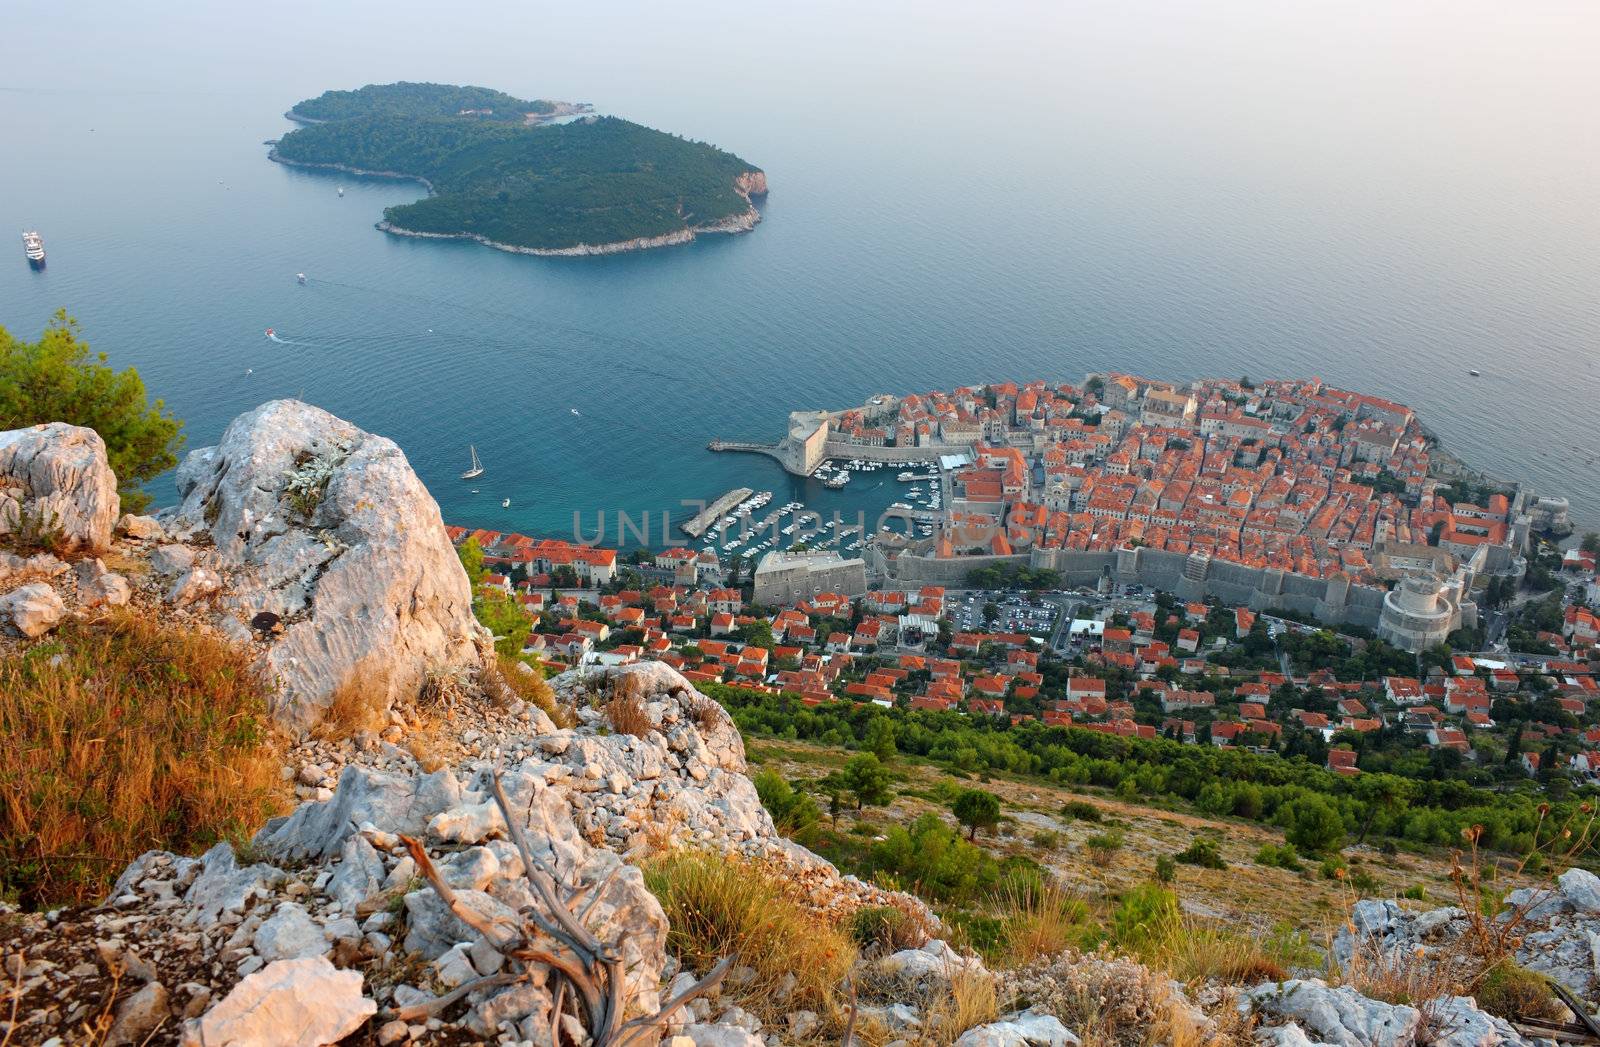 Panoramic view of the Old Town Dubrovnik and Island Lokrum from the mountain Srd.